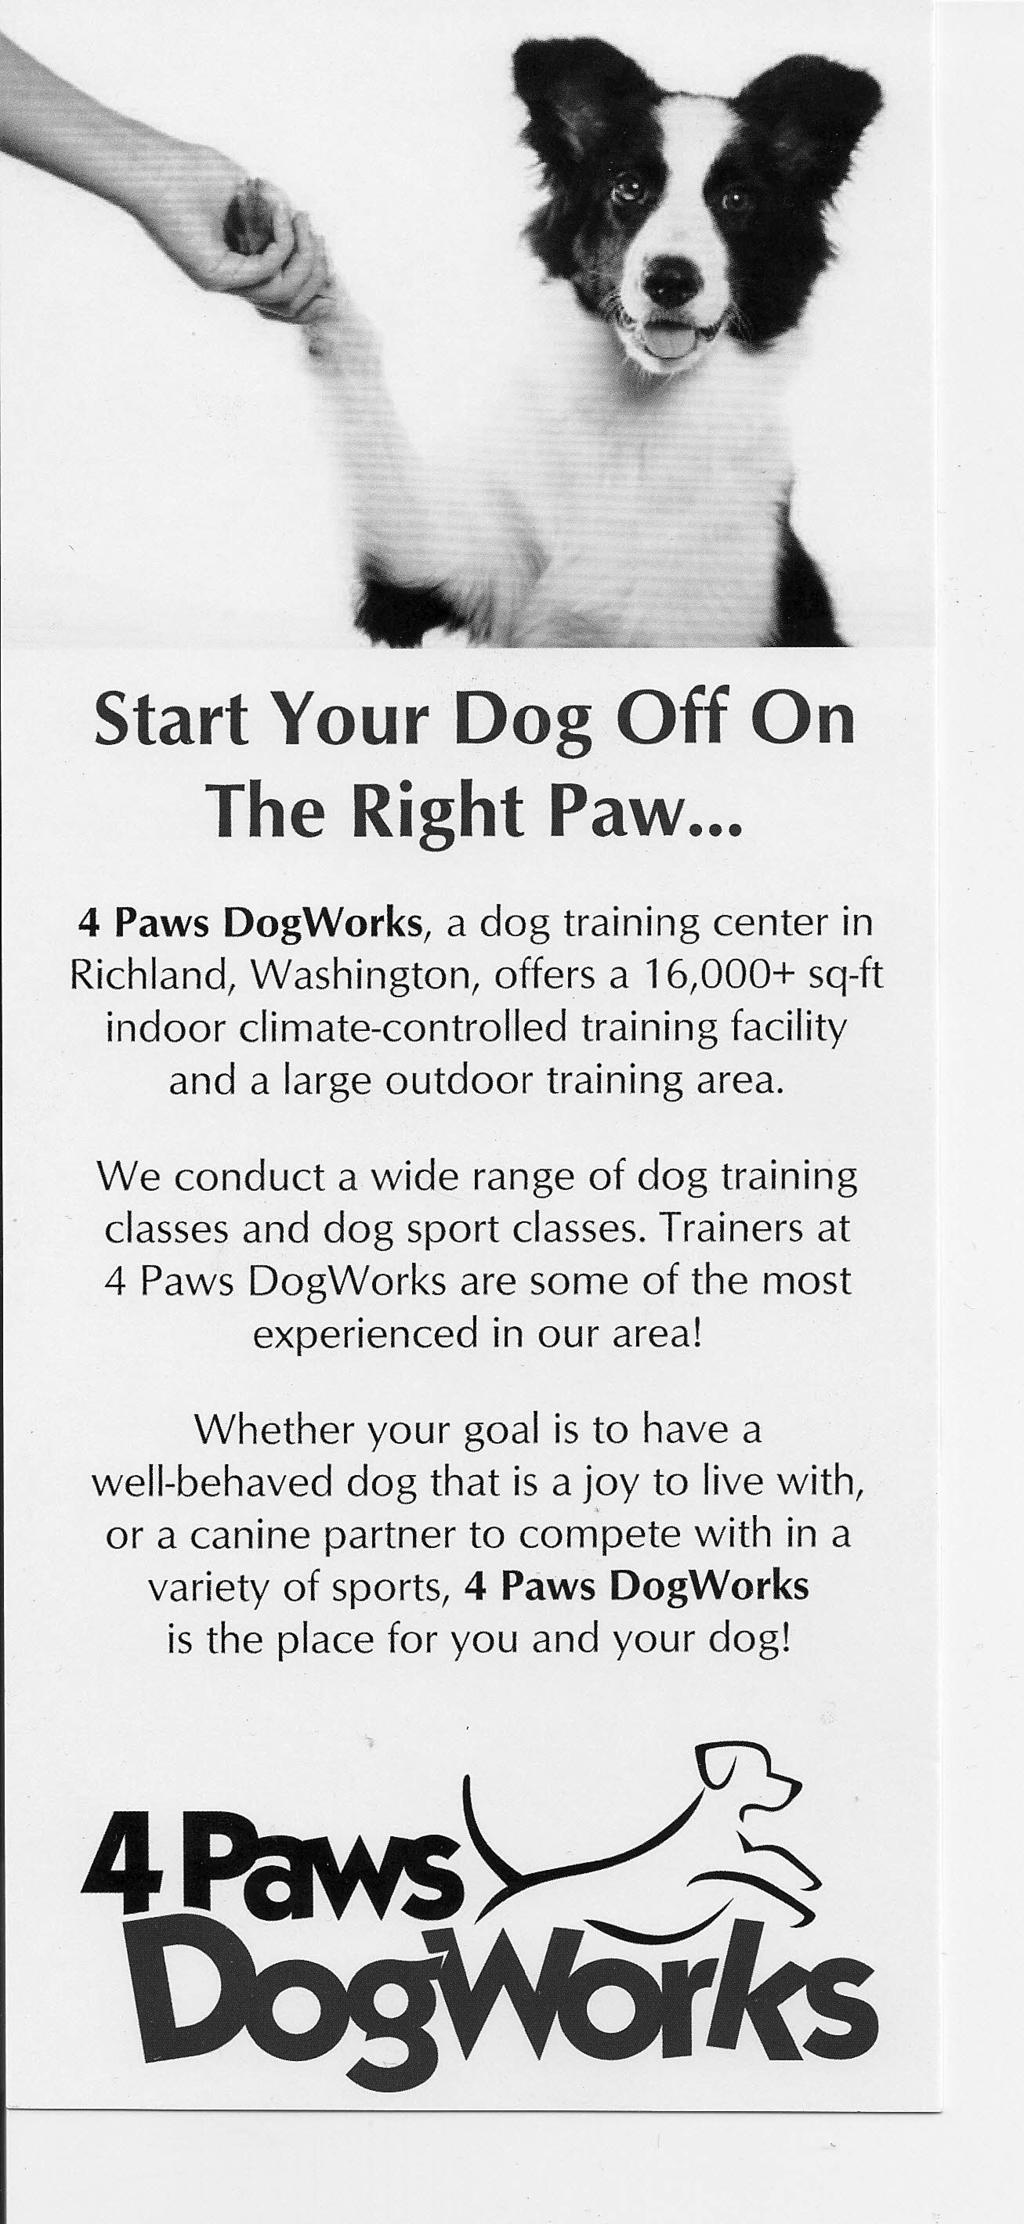 Start Your Dog Off On The Right Paw.